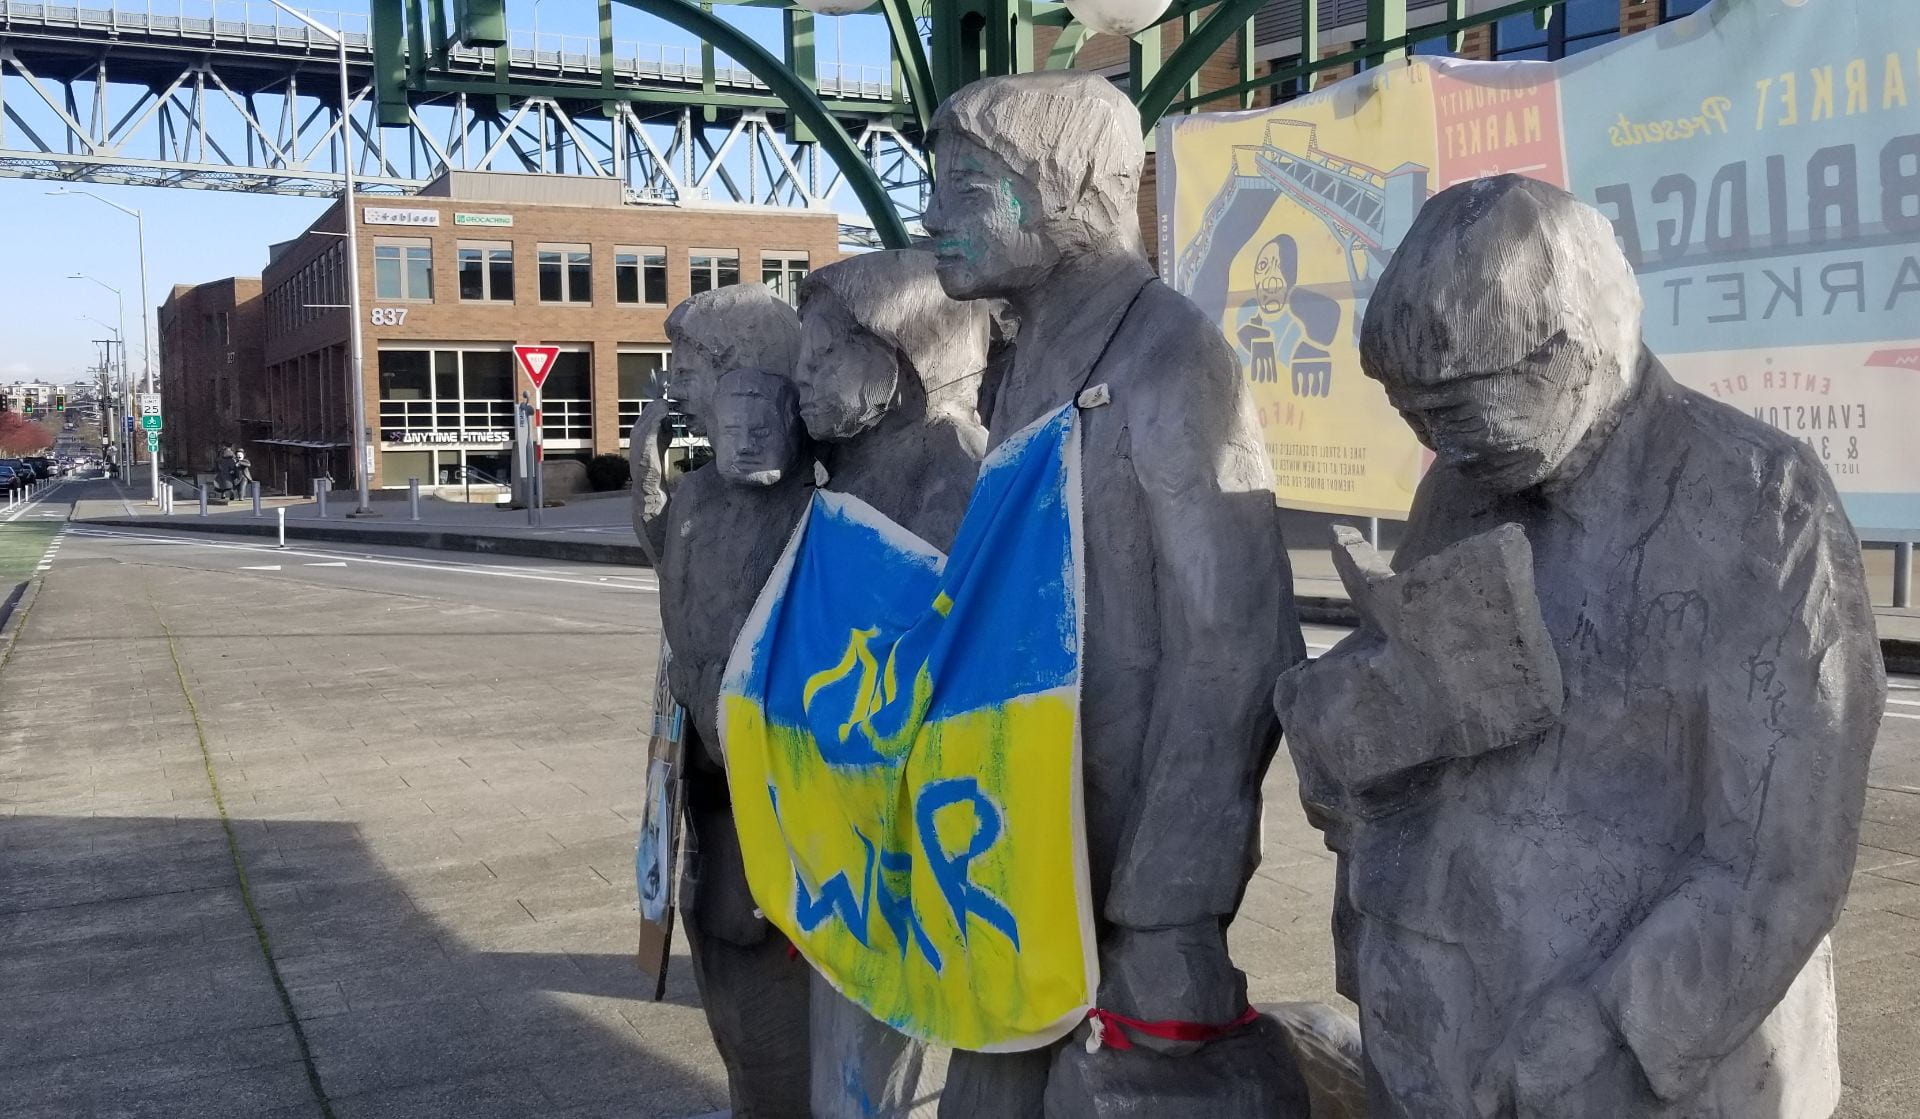 A Ukrainian flag reading No War is draped over the Waiting for the Interurban statue in Seattle's Fremont neighborhood